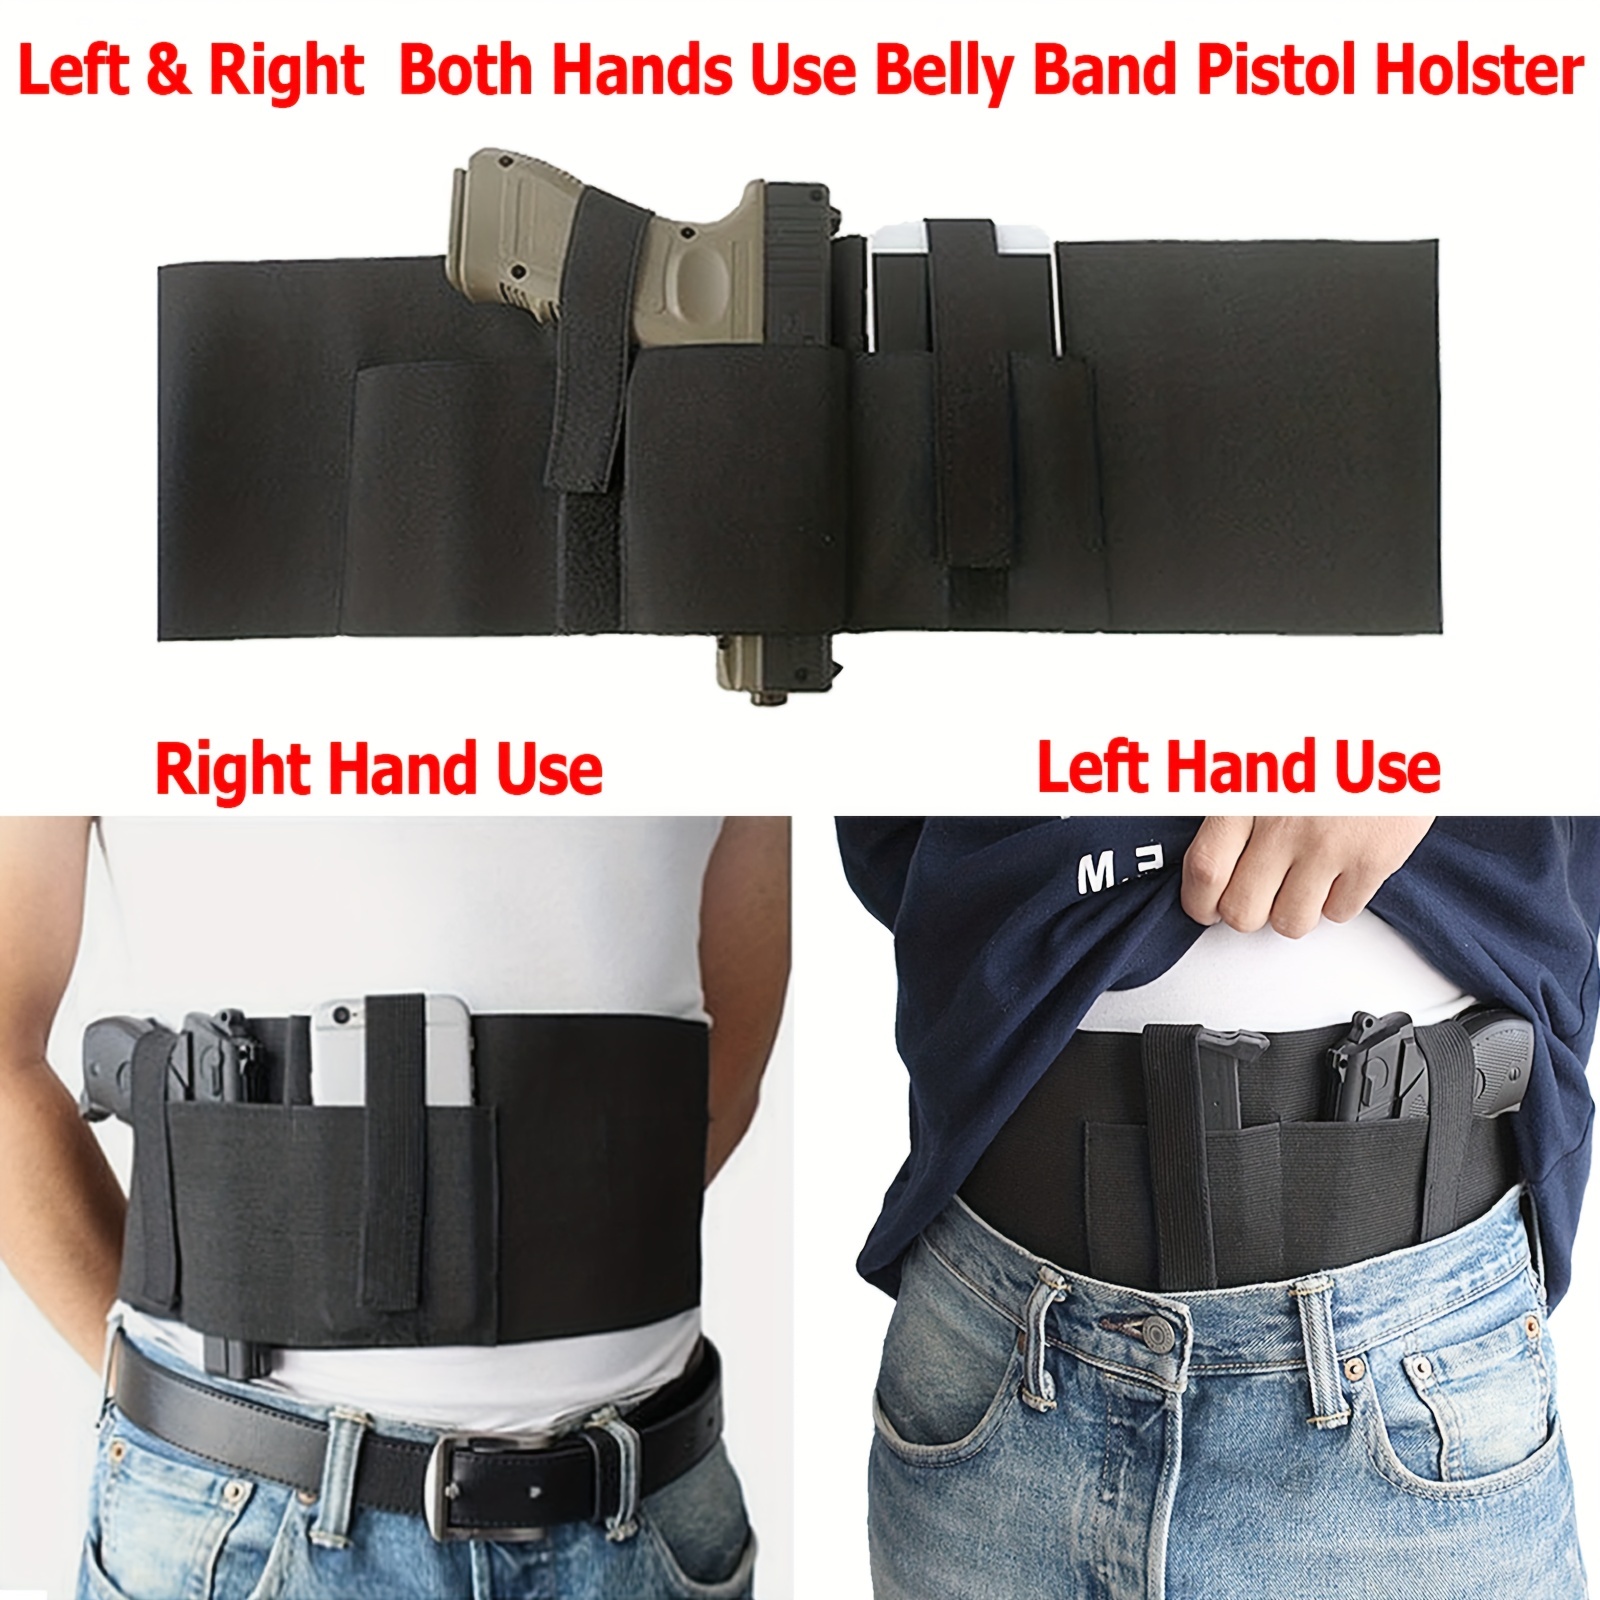 Tactical Belly Band Pistol Holster Concealed Carry Gun Holder fit